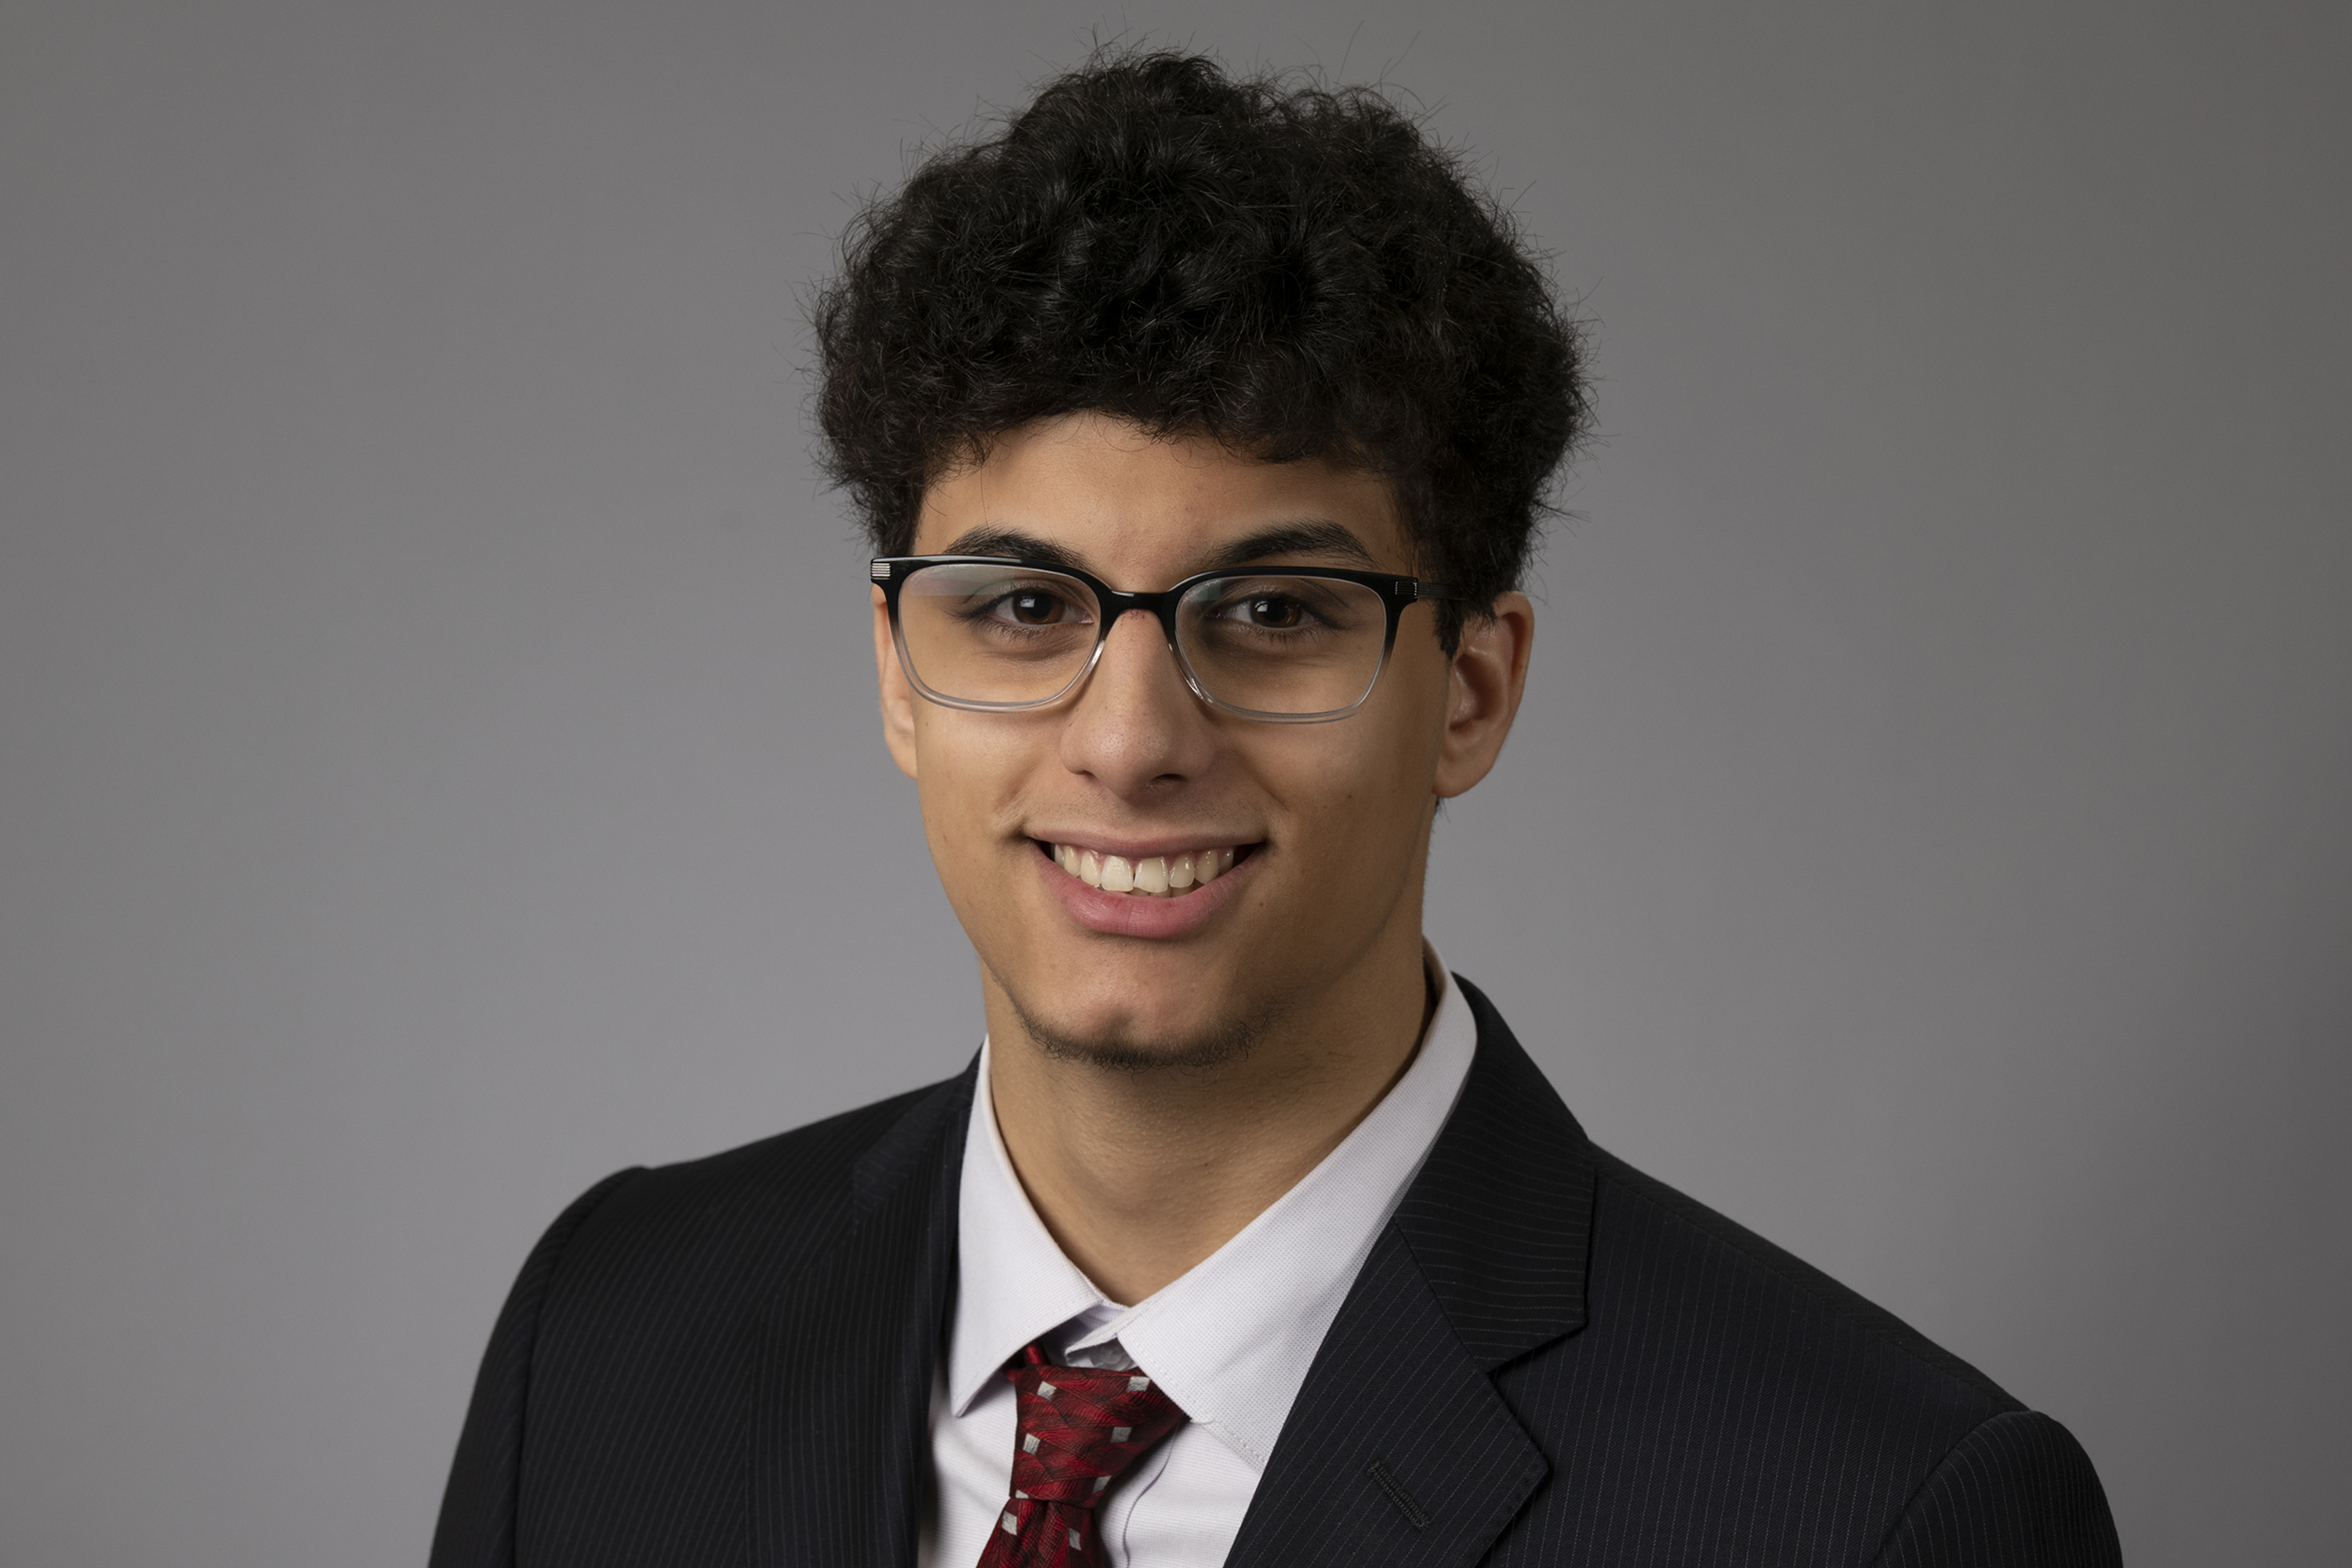 Sami Saeed Elected as Next Student Member of the Board